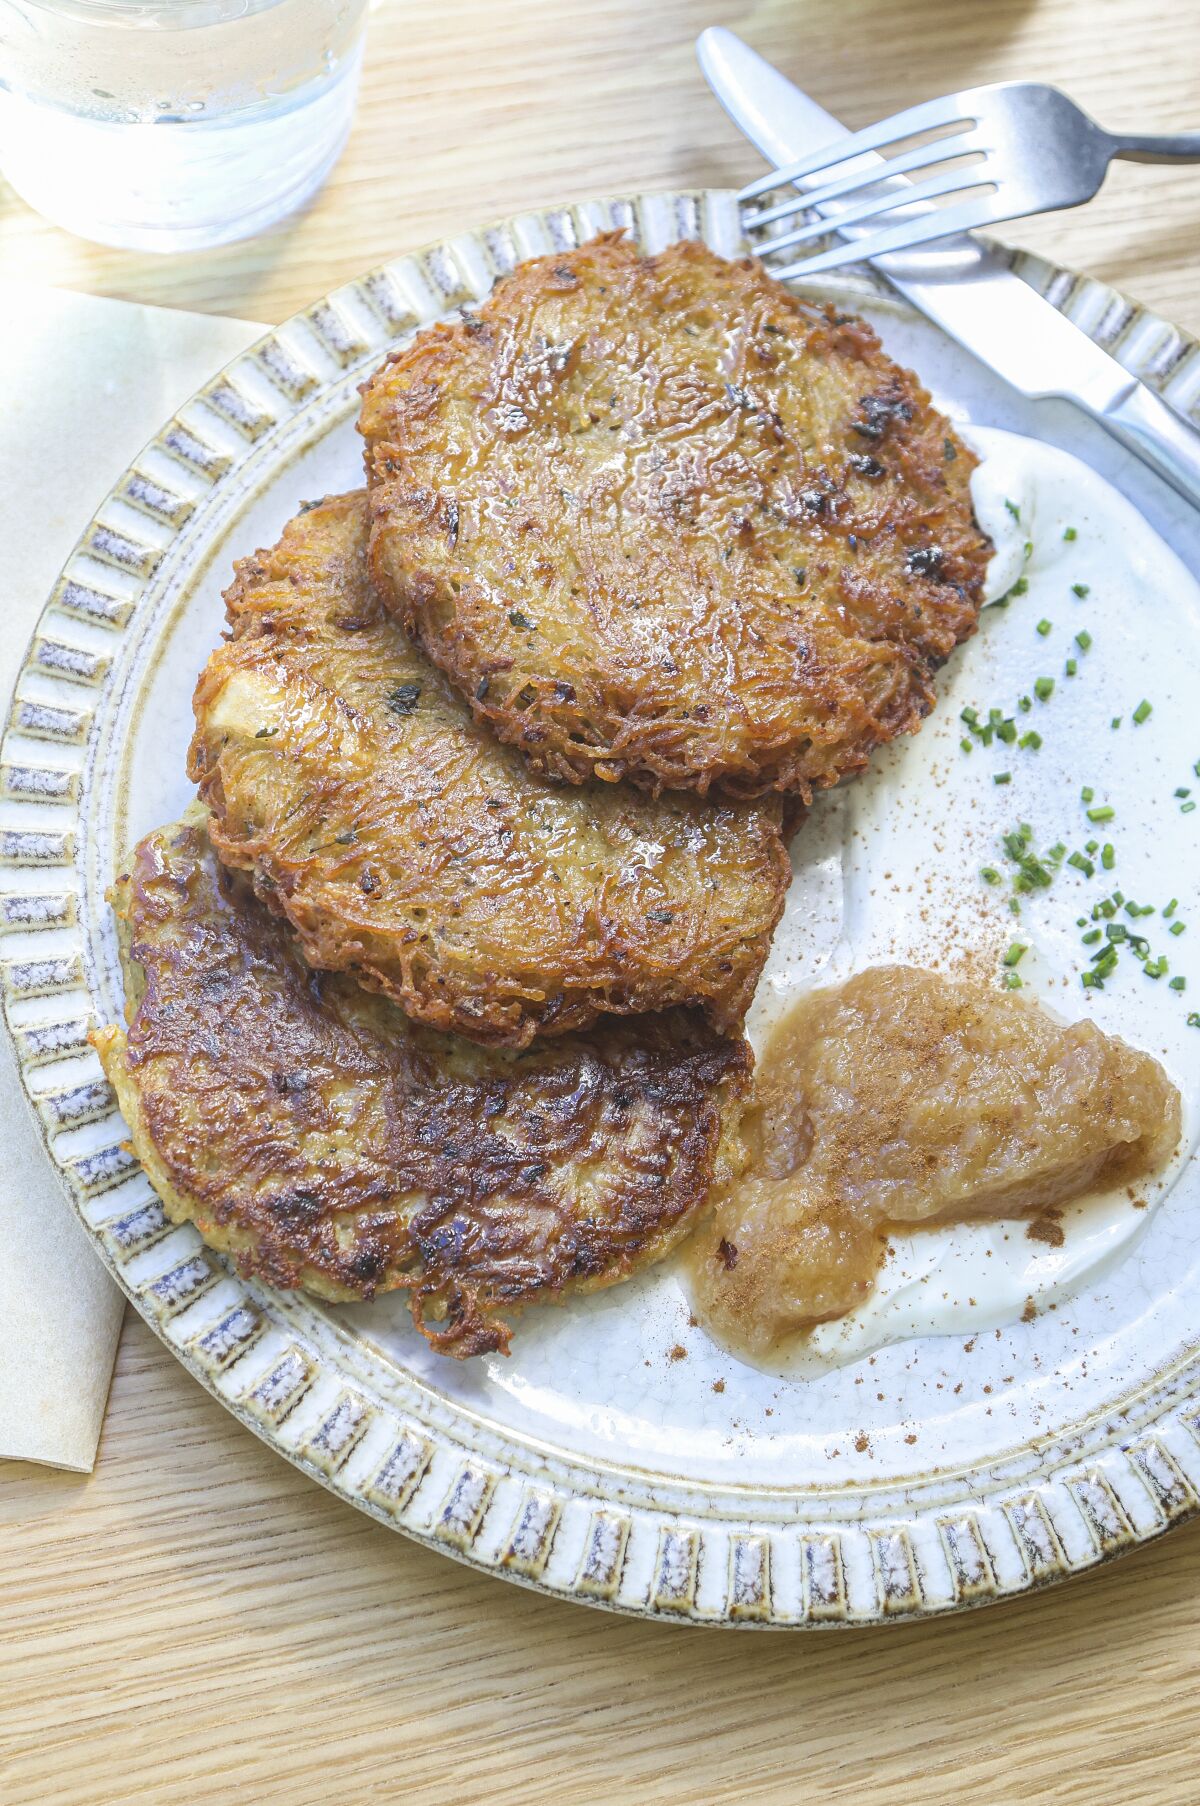 Potato latkes by chef Jeff Armstrong at Gold Finch Modern Delicatessen.